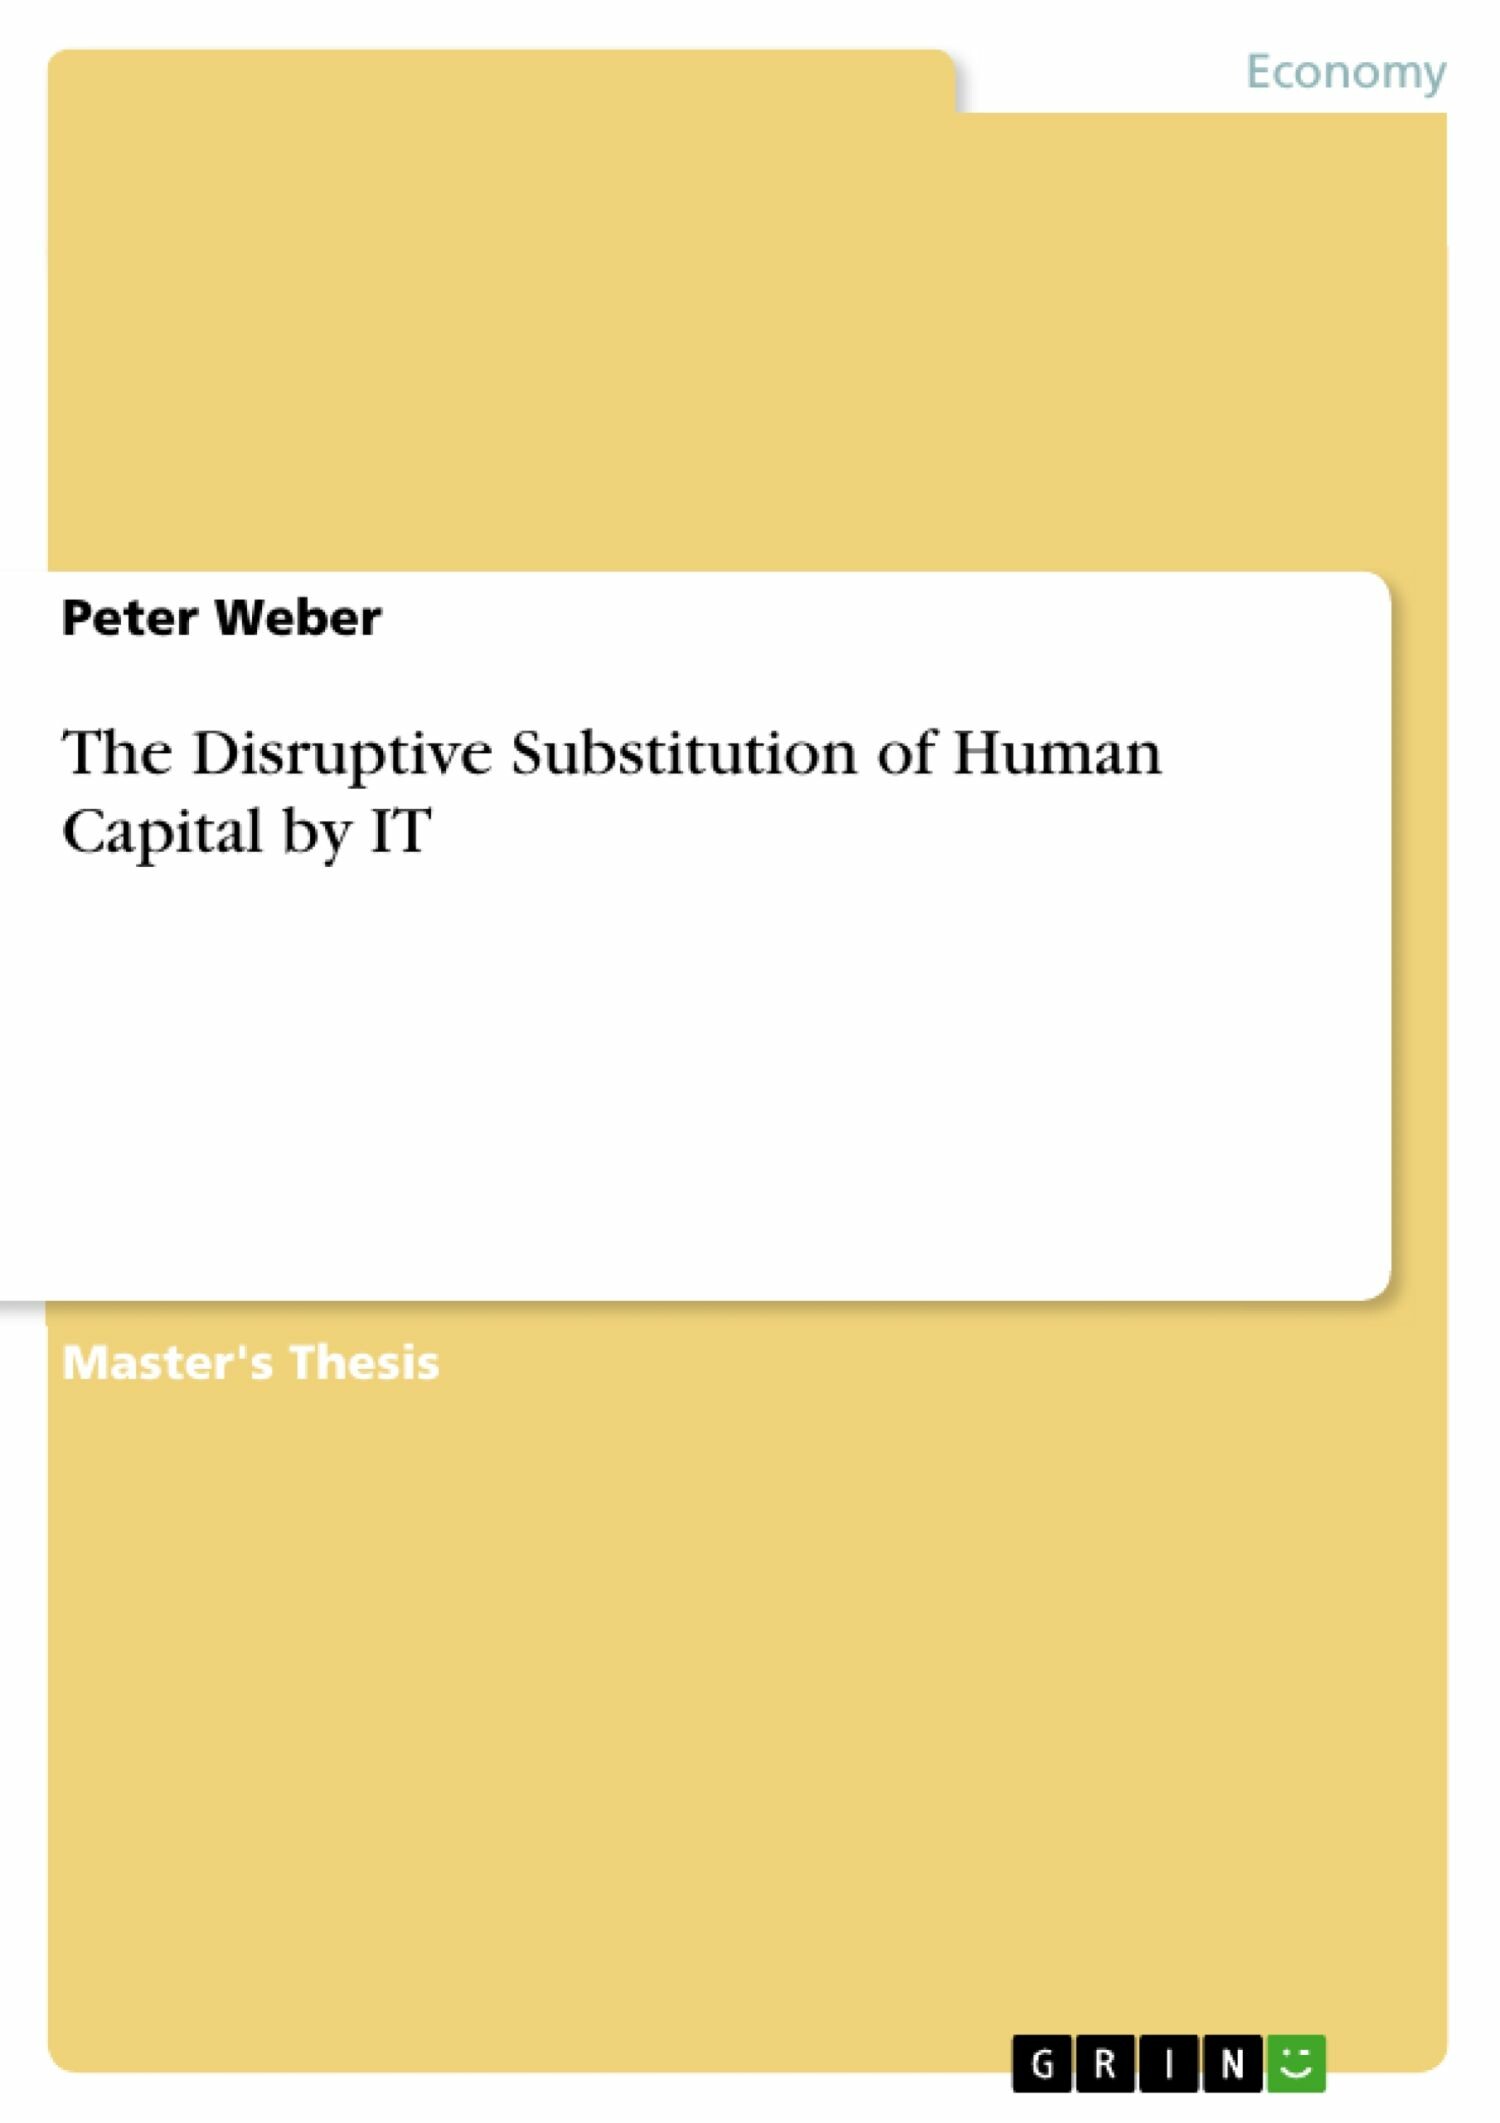 The Disruptive Substitution of Human Capital by IT